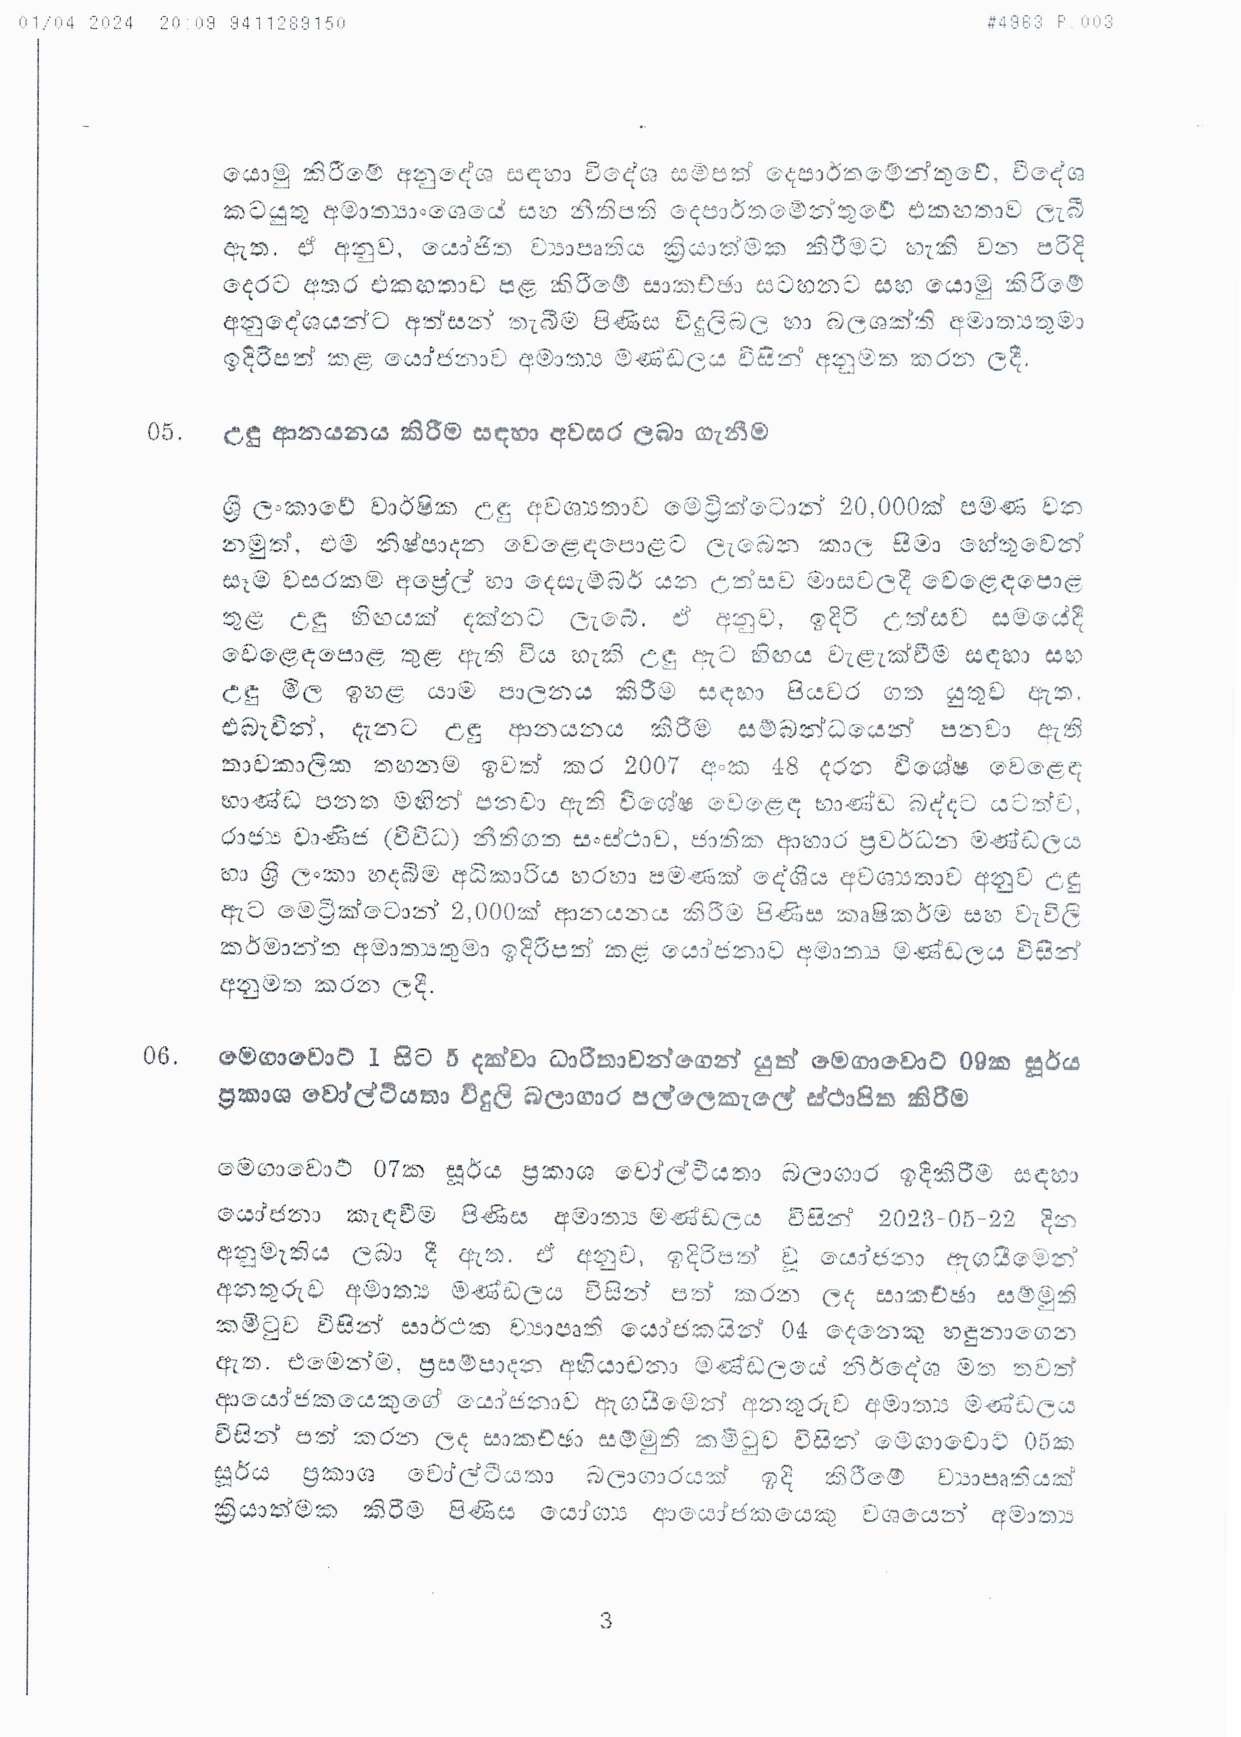 Cabinet Decisions on 01.04.2024 compressed page 0003